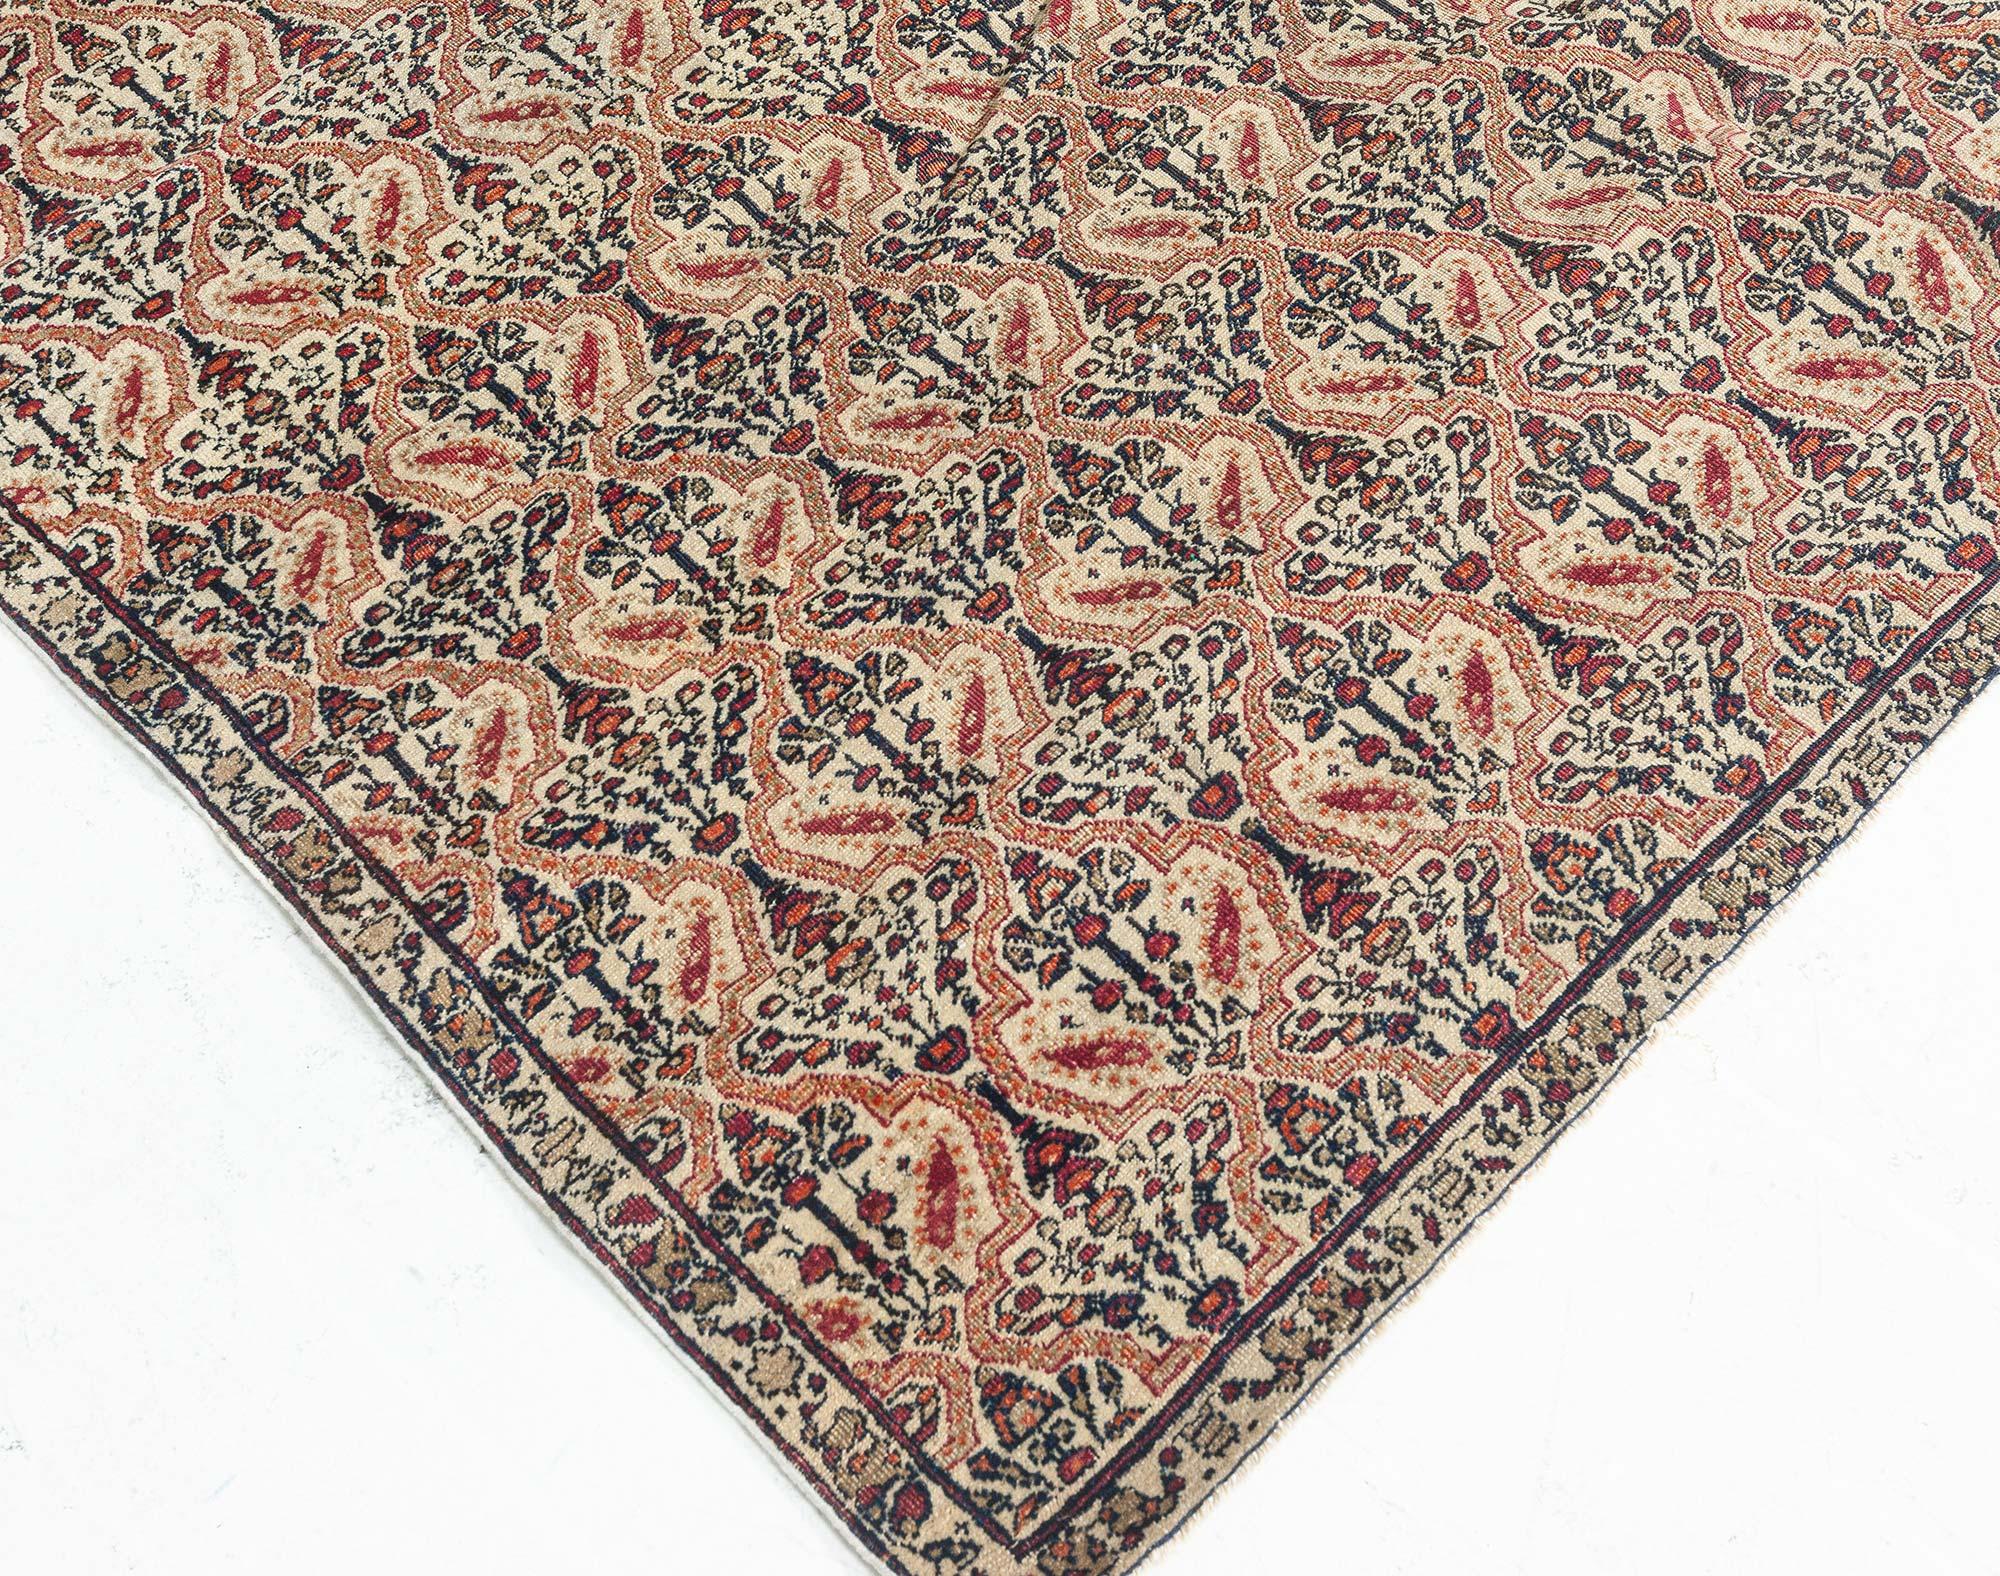 19th Century Persian Kirman Botanic Red, Green and Beige Handwoven Wool Rug For Sale 2